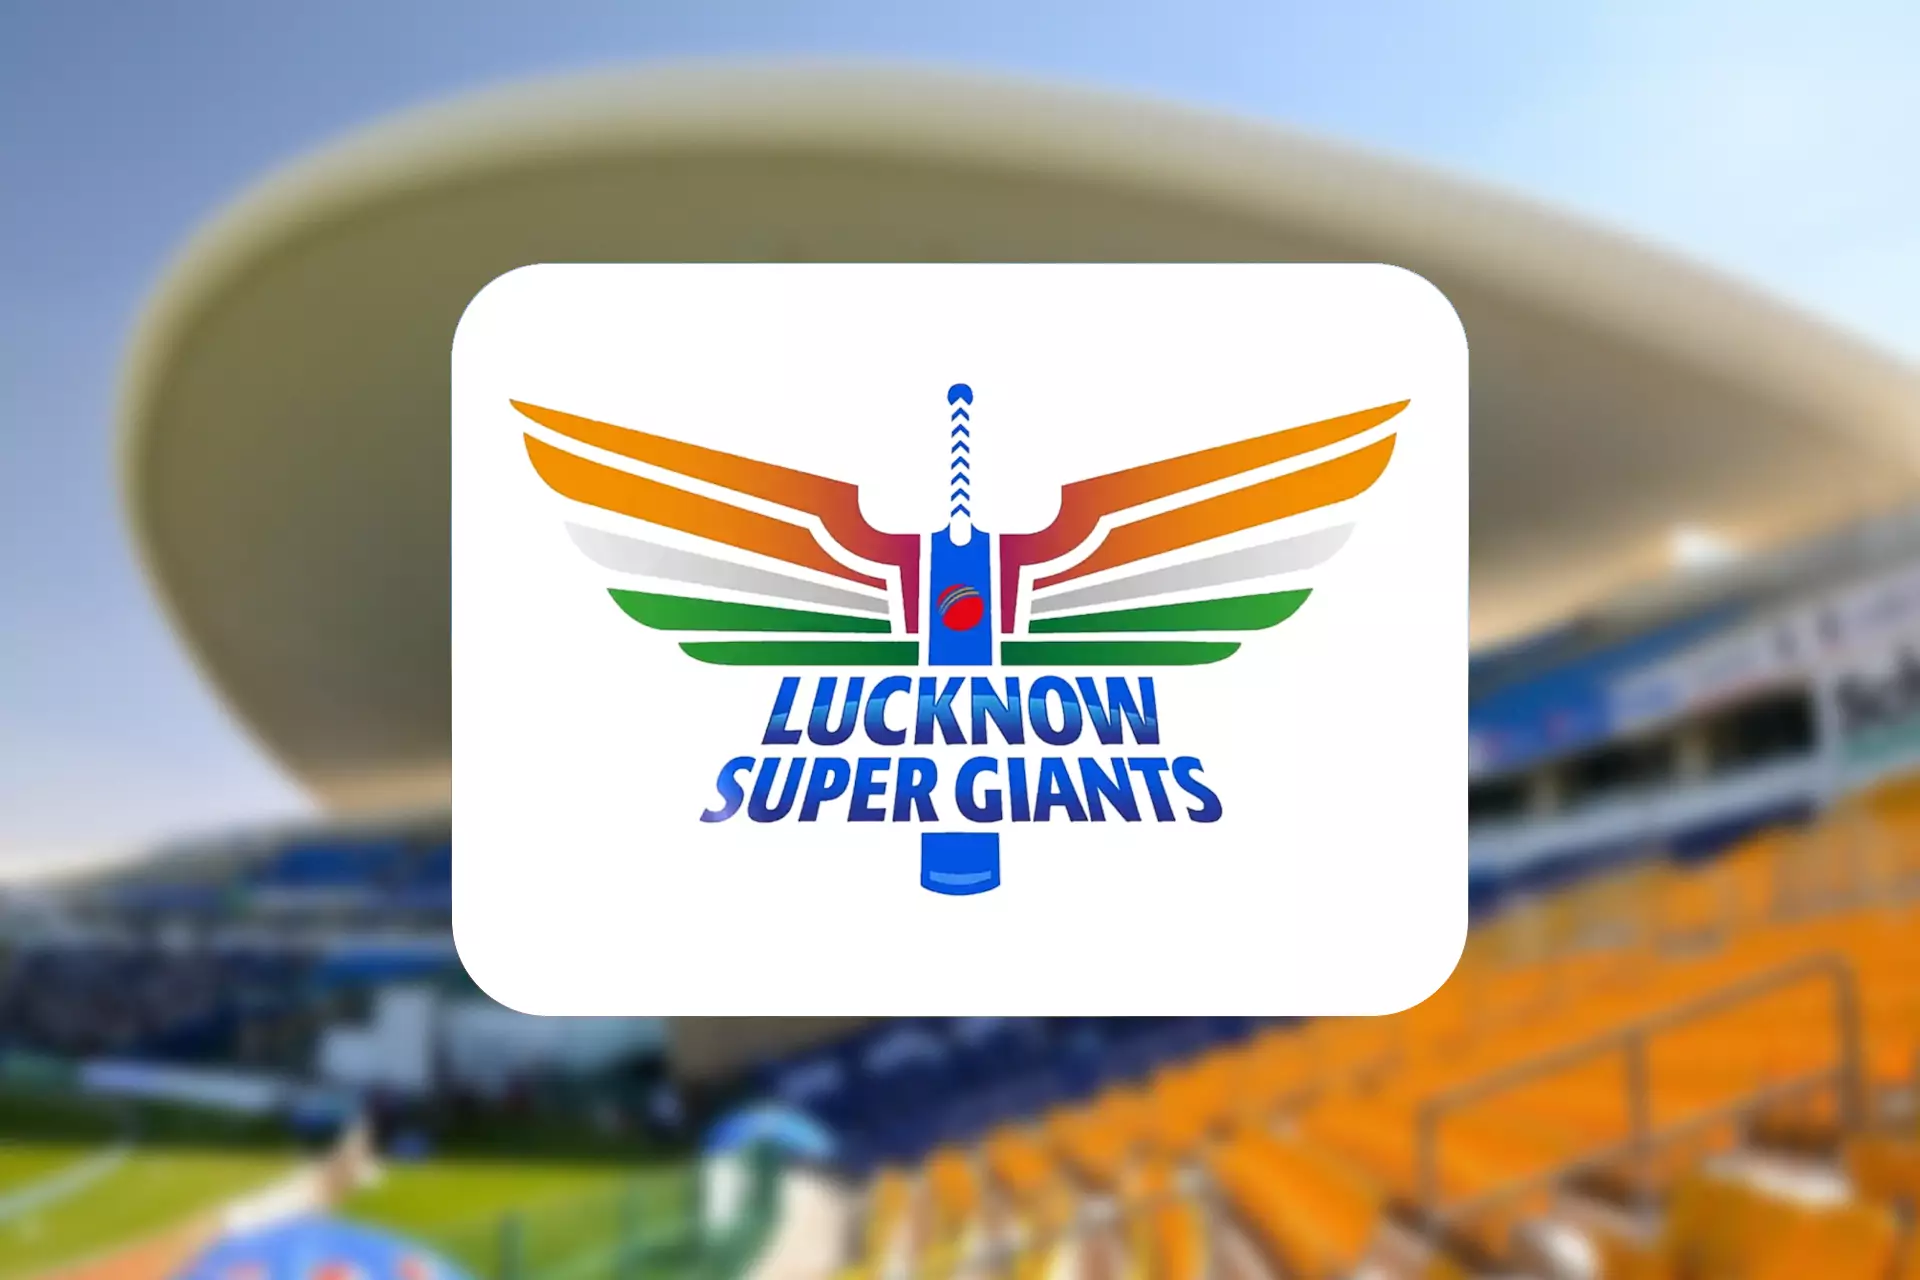 The Lucknow Super Giants have joined the new season in IPL 2022.